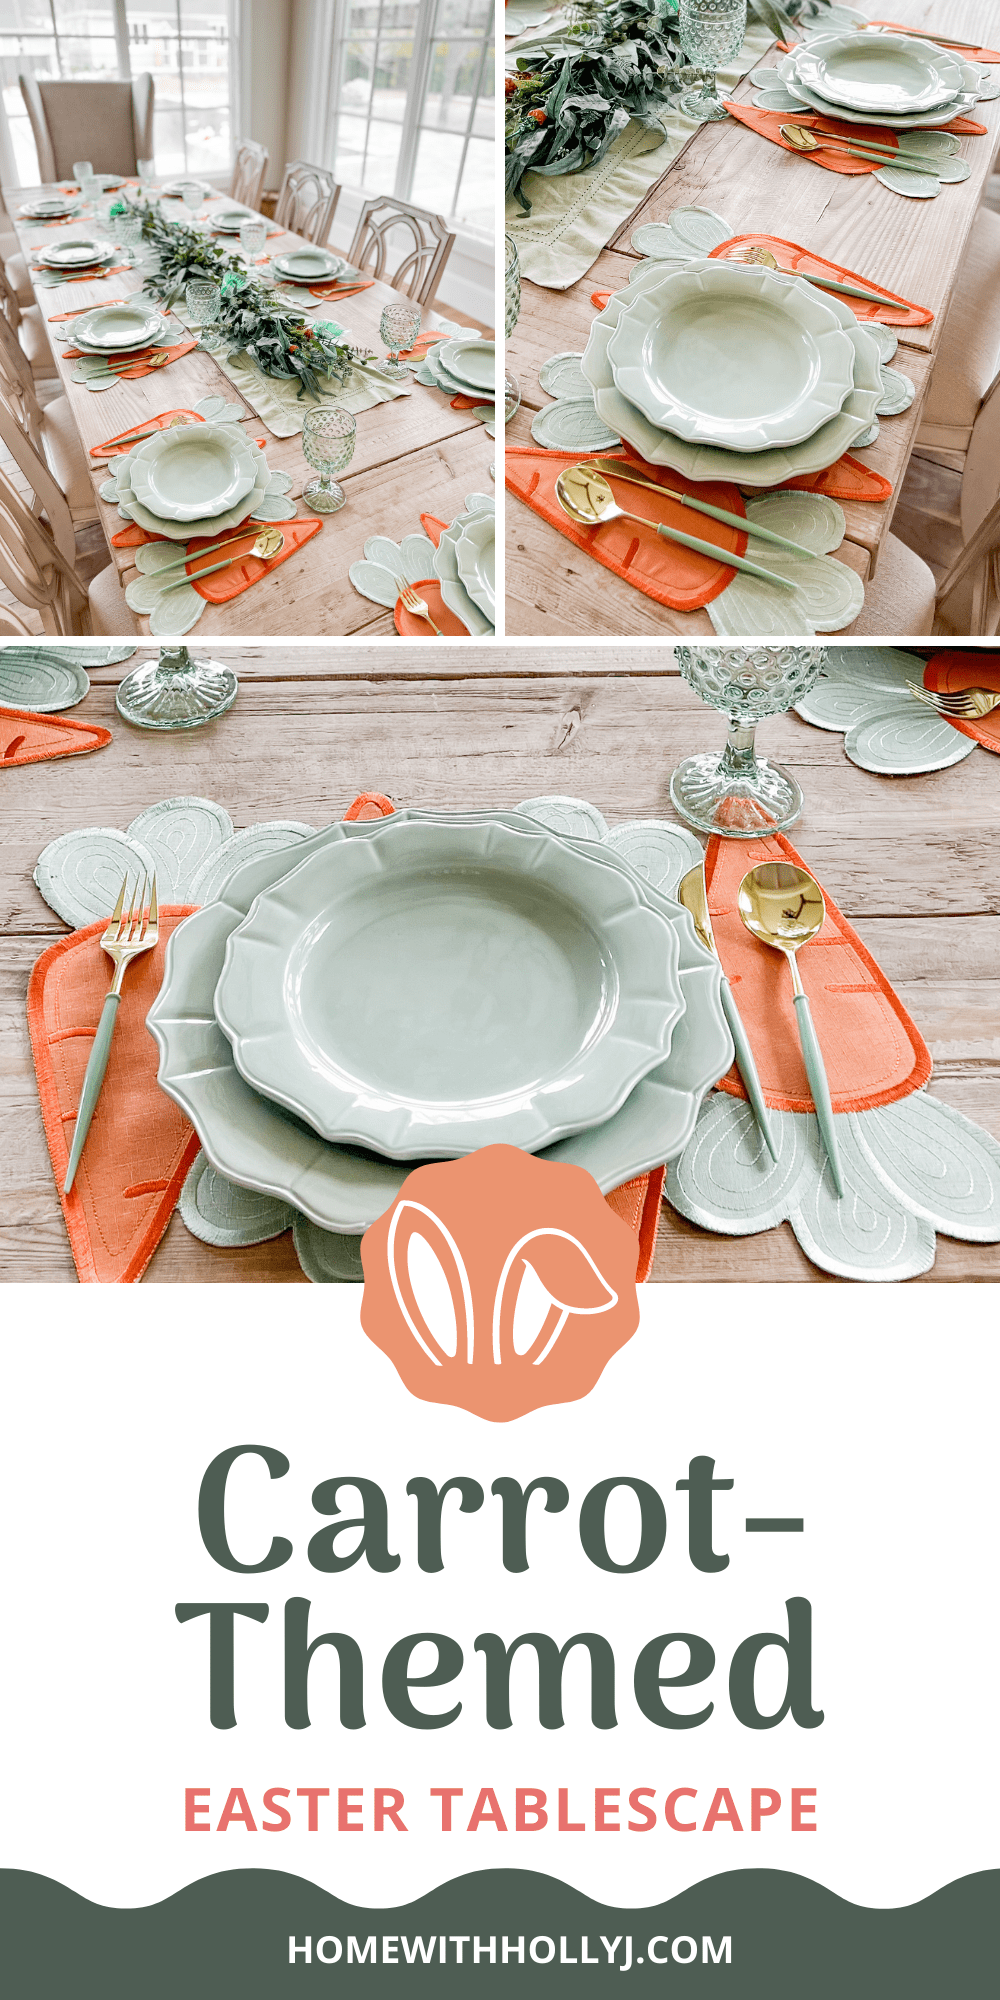 Create the perfect Easter tablescape for your next party with this easy and festive carrot-themed tablescape. From the placemats to the floral garland and delicious chocolate carrots, you'll have everything you need for your unique Easter celebration.